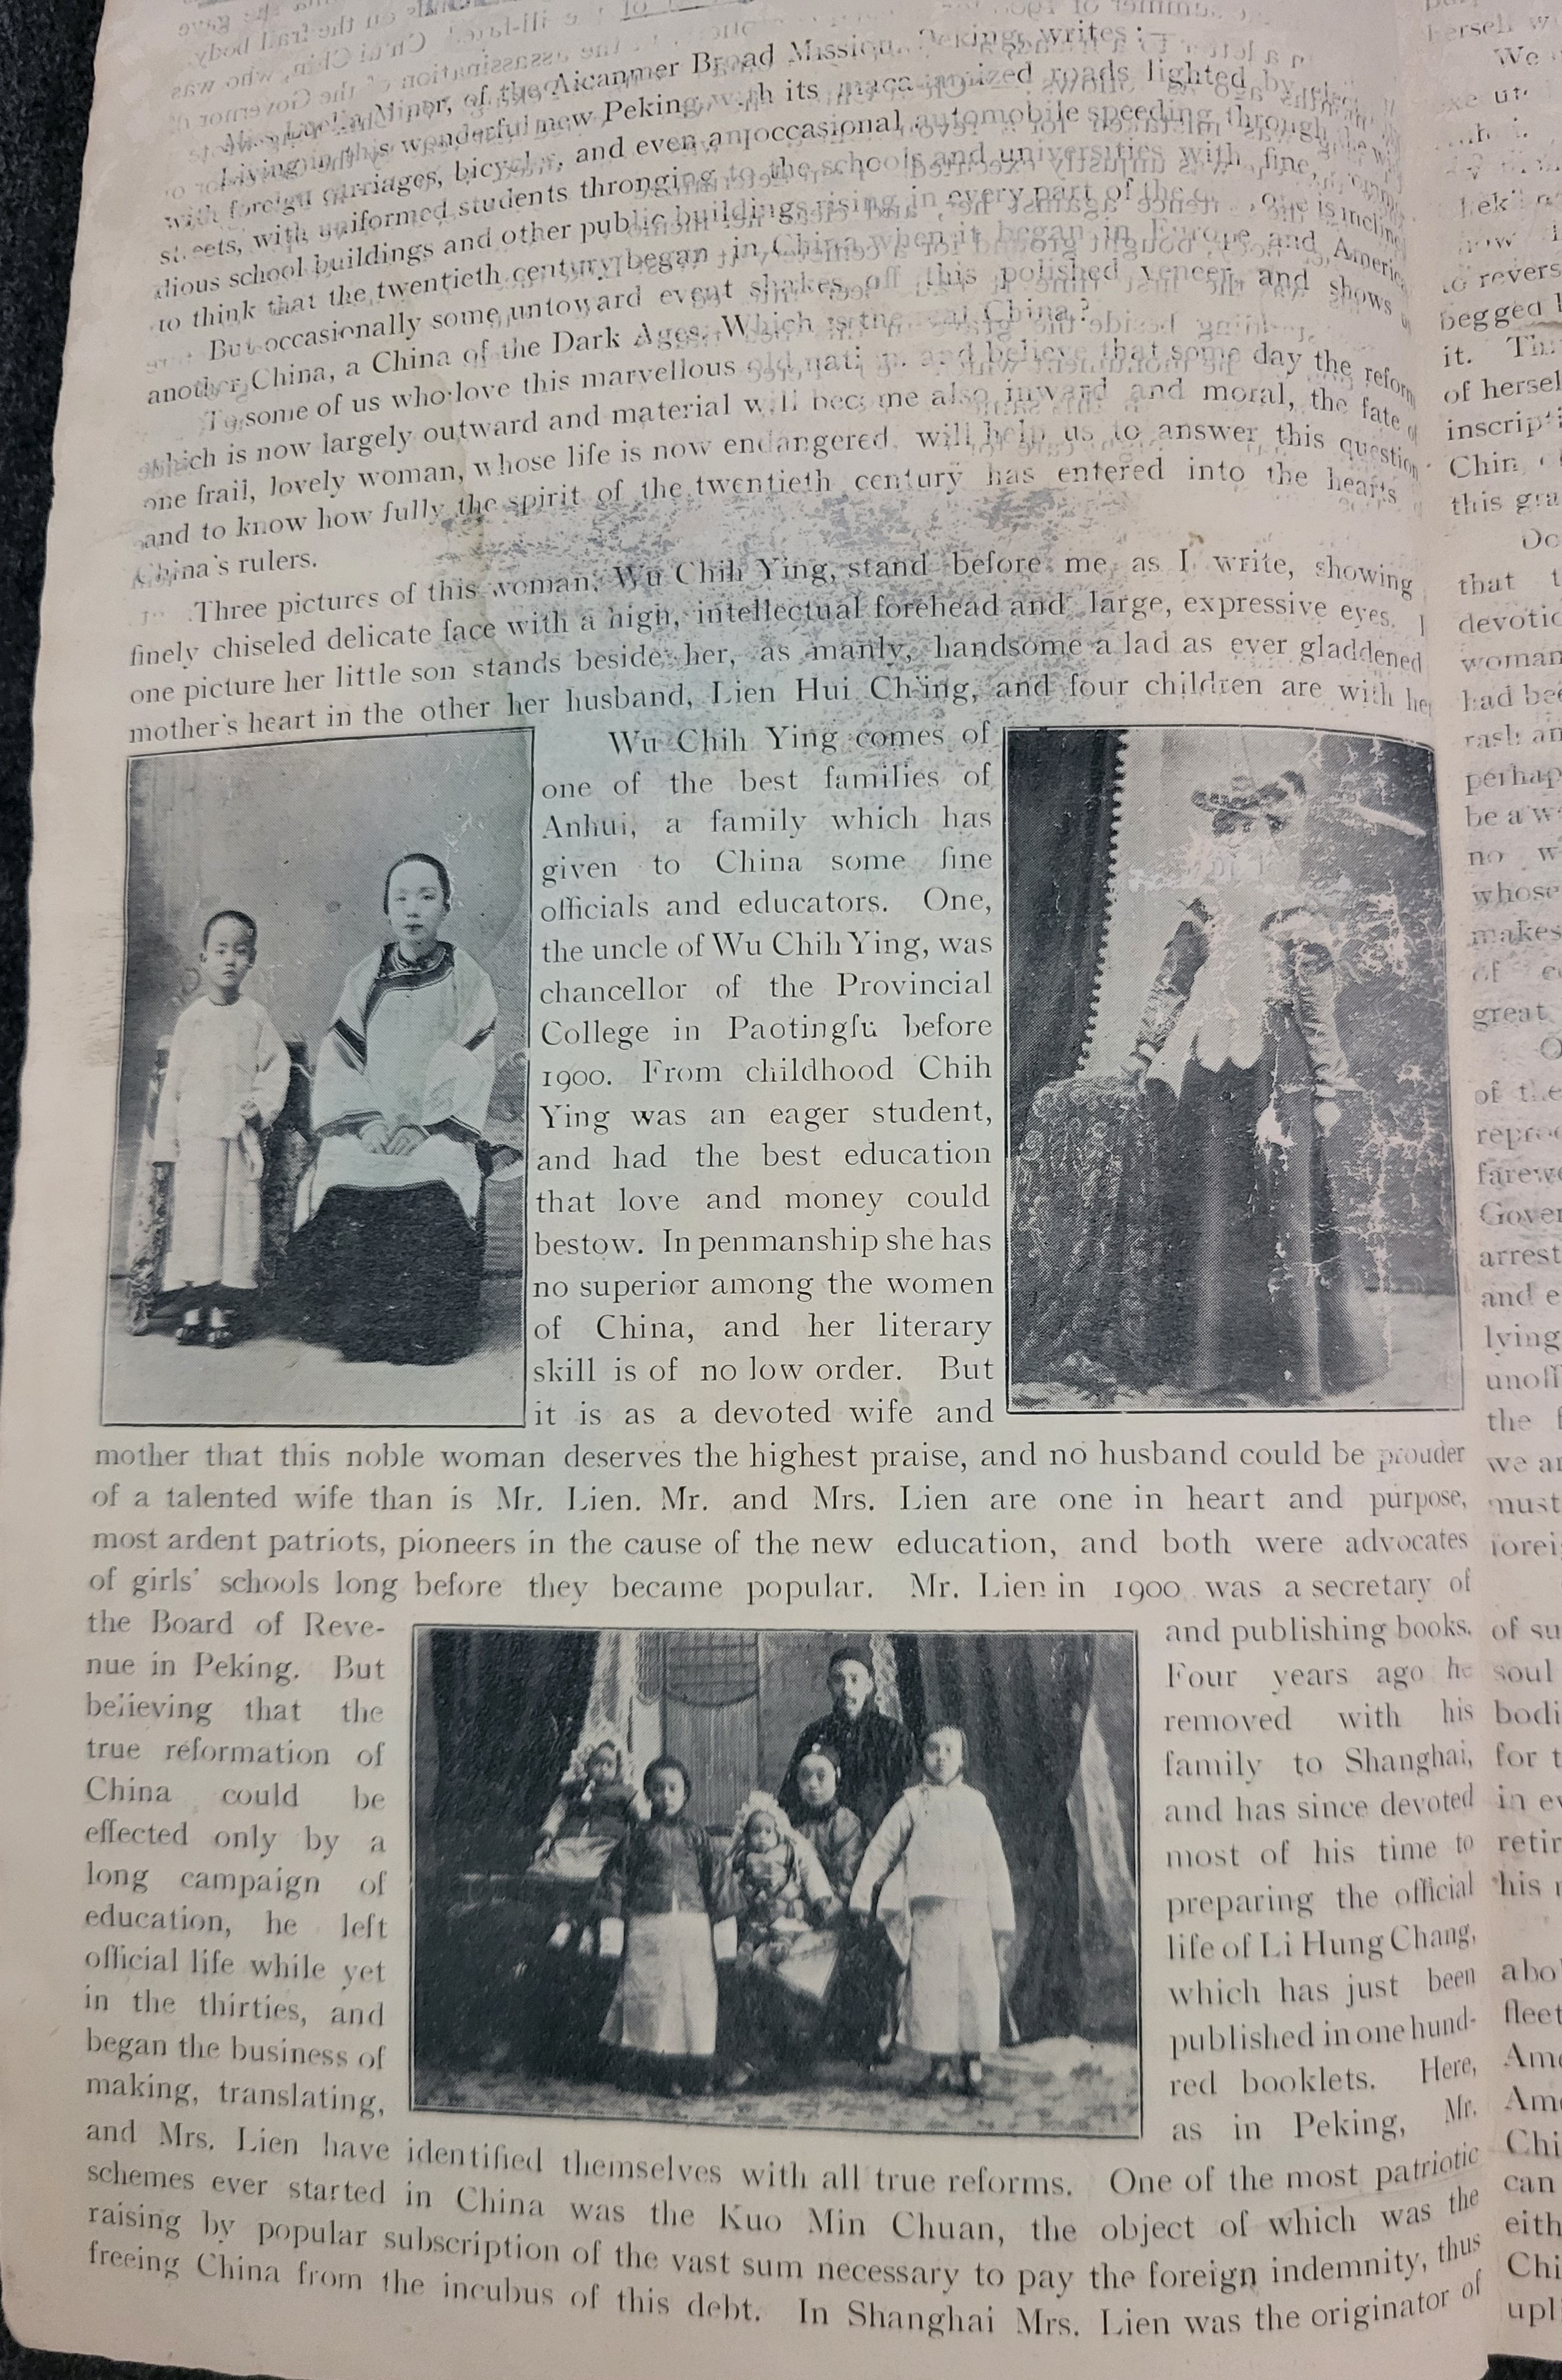 Luella Miner's newspaper article with images of Wu Zhiying.